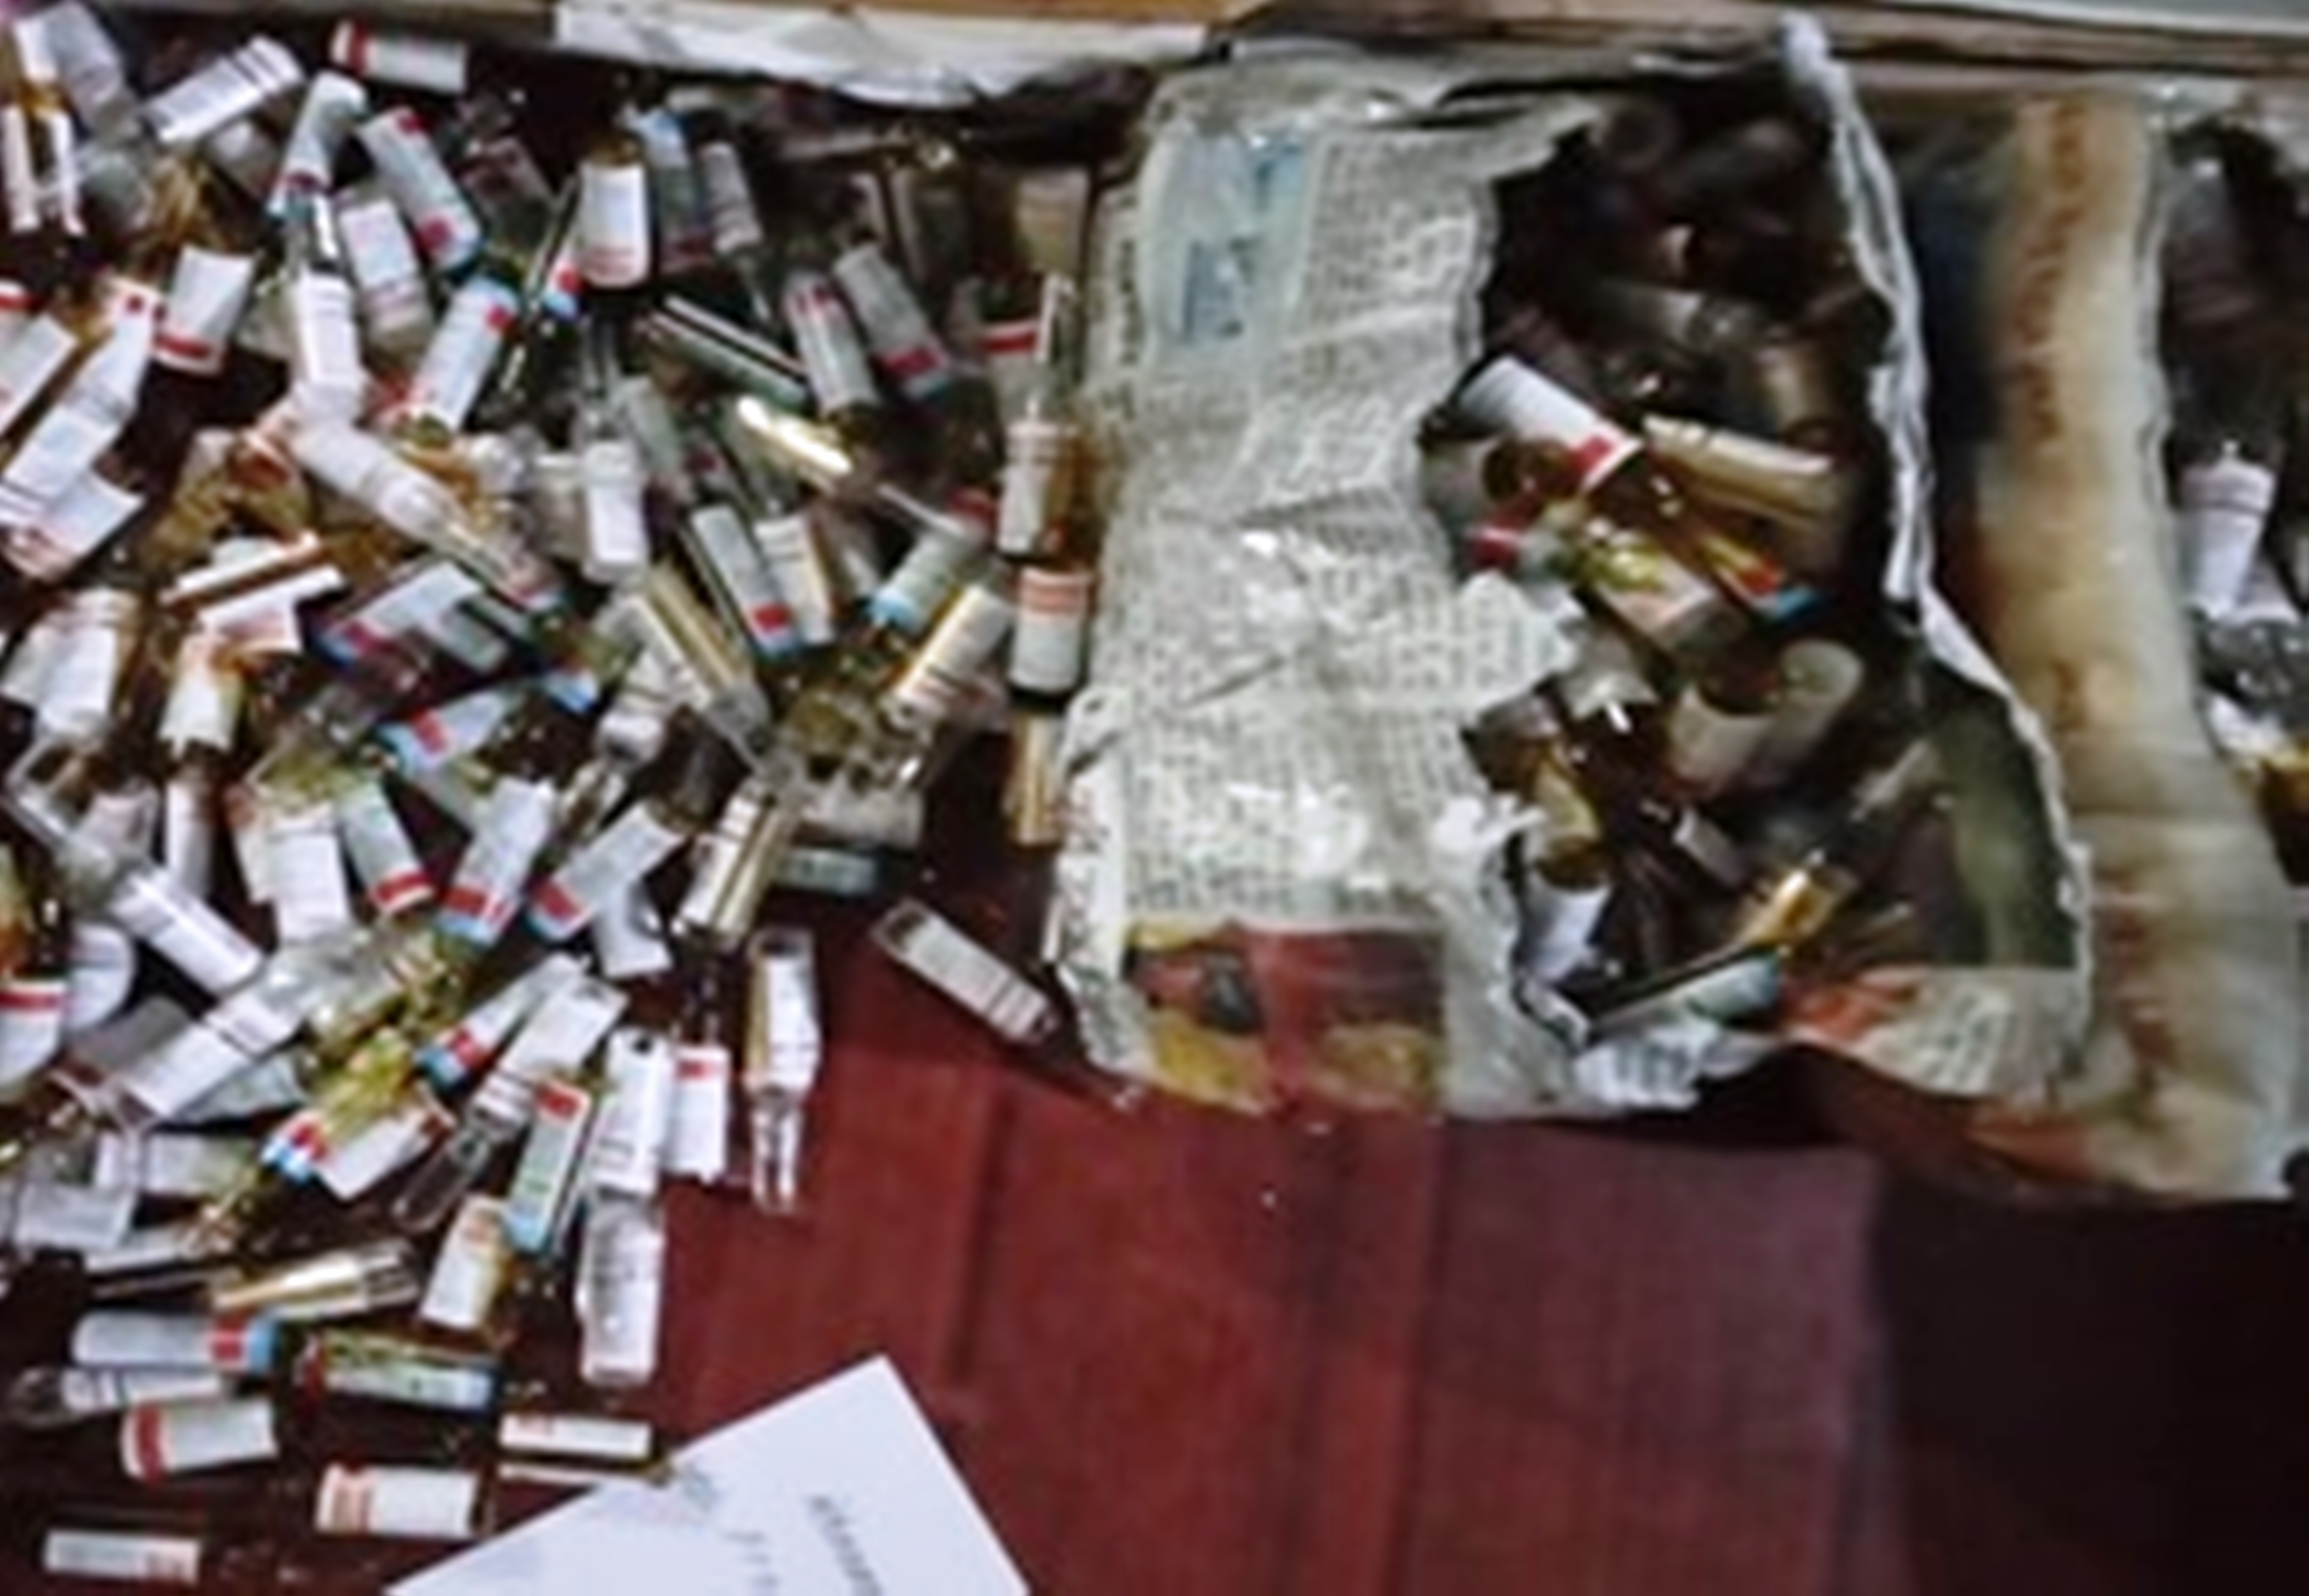 Seized ampoules of prohibited pharmaceuticals-- Diazepam, Phenergan and Nurofen-- have been pictured. Photo: Prabhat Jha/THT